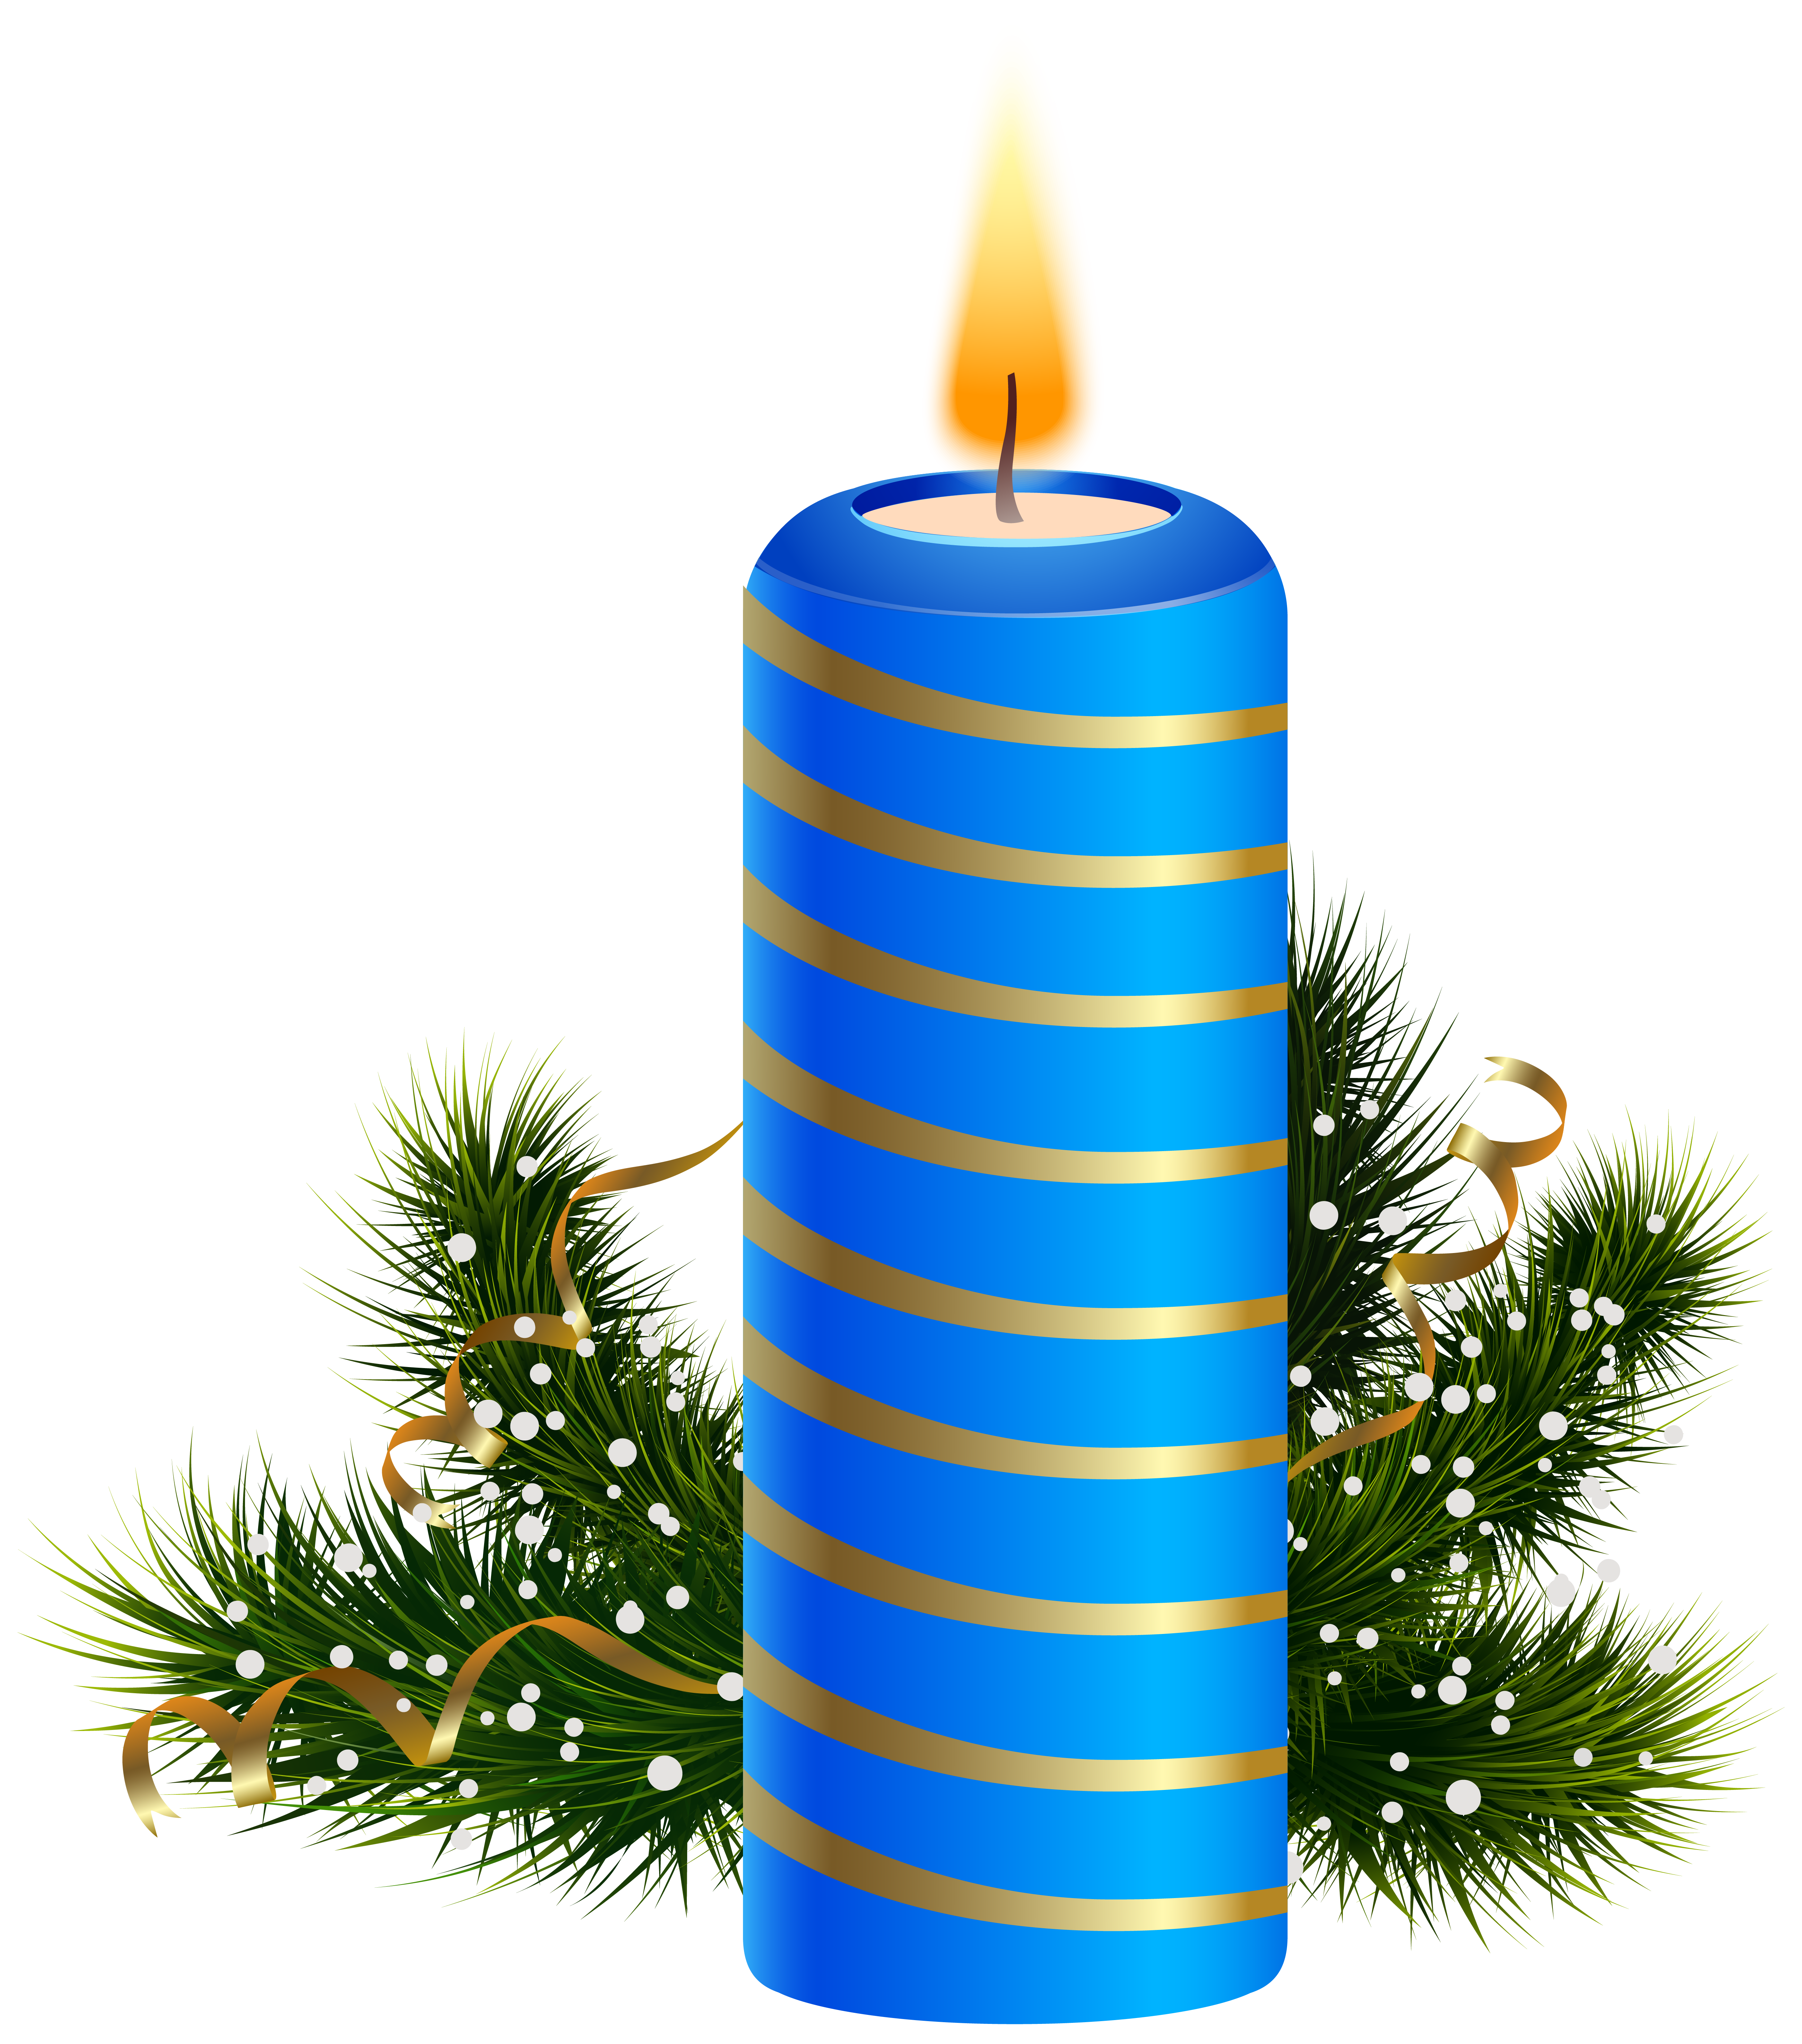 Blue Christmas Candle PNG Clipart Image | Gallery ...